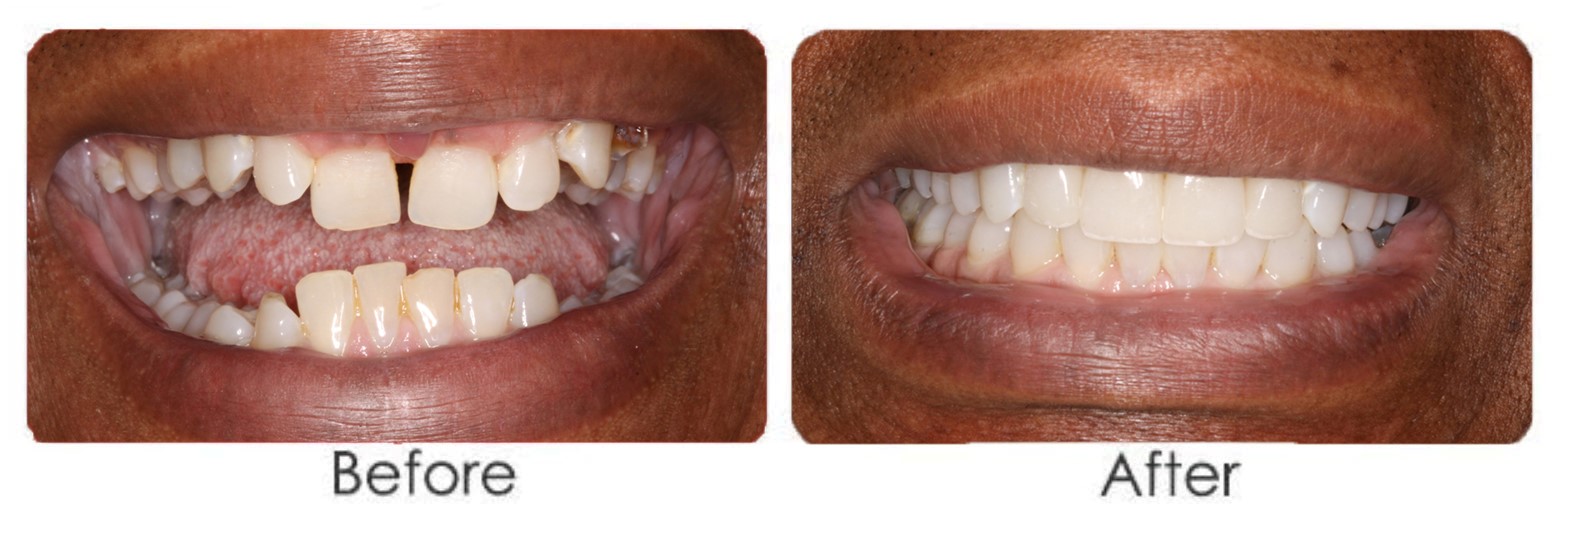 Invisalign Before And After Pictures